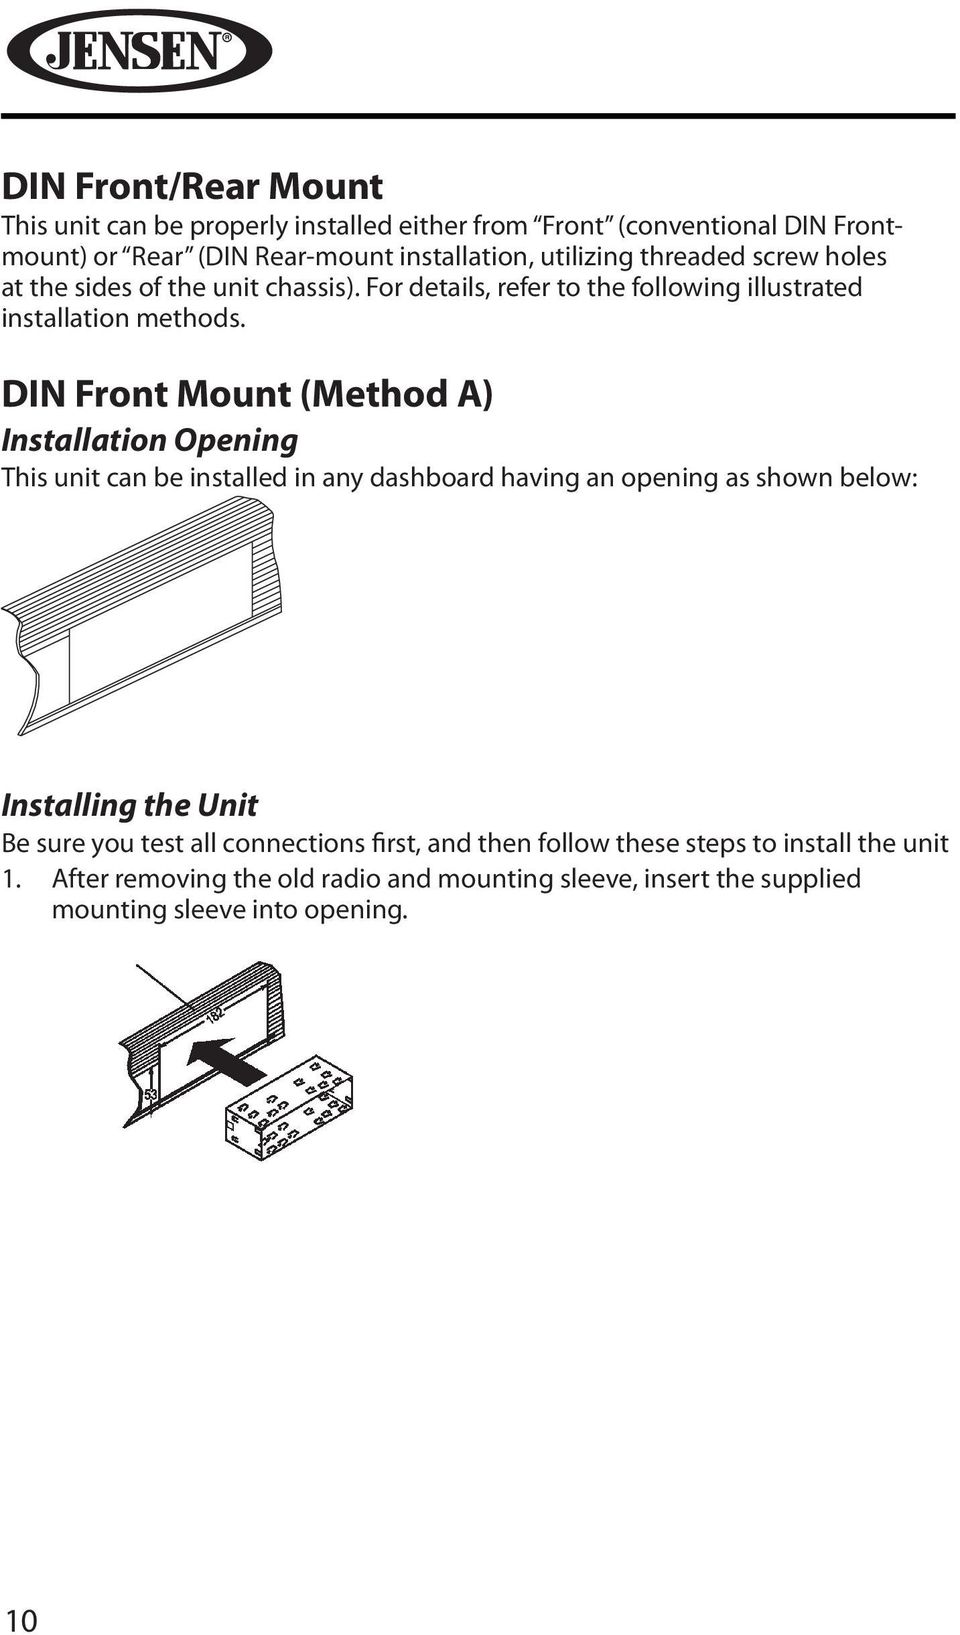 DIN Front Mount (Method A) Installation Opening This unit can be installed in any dashboard having an opening as shown below: Installing the Unit Be sure